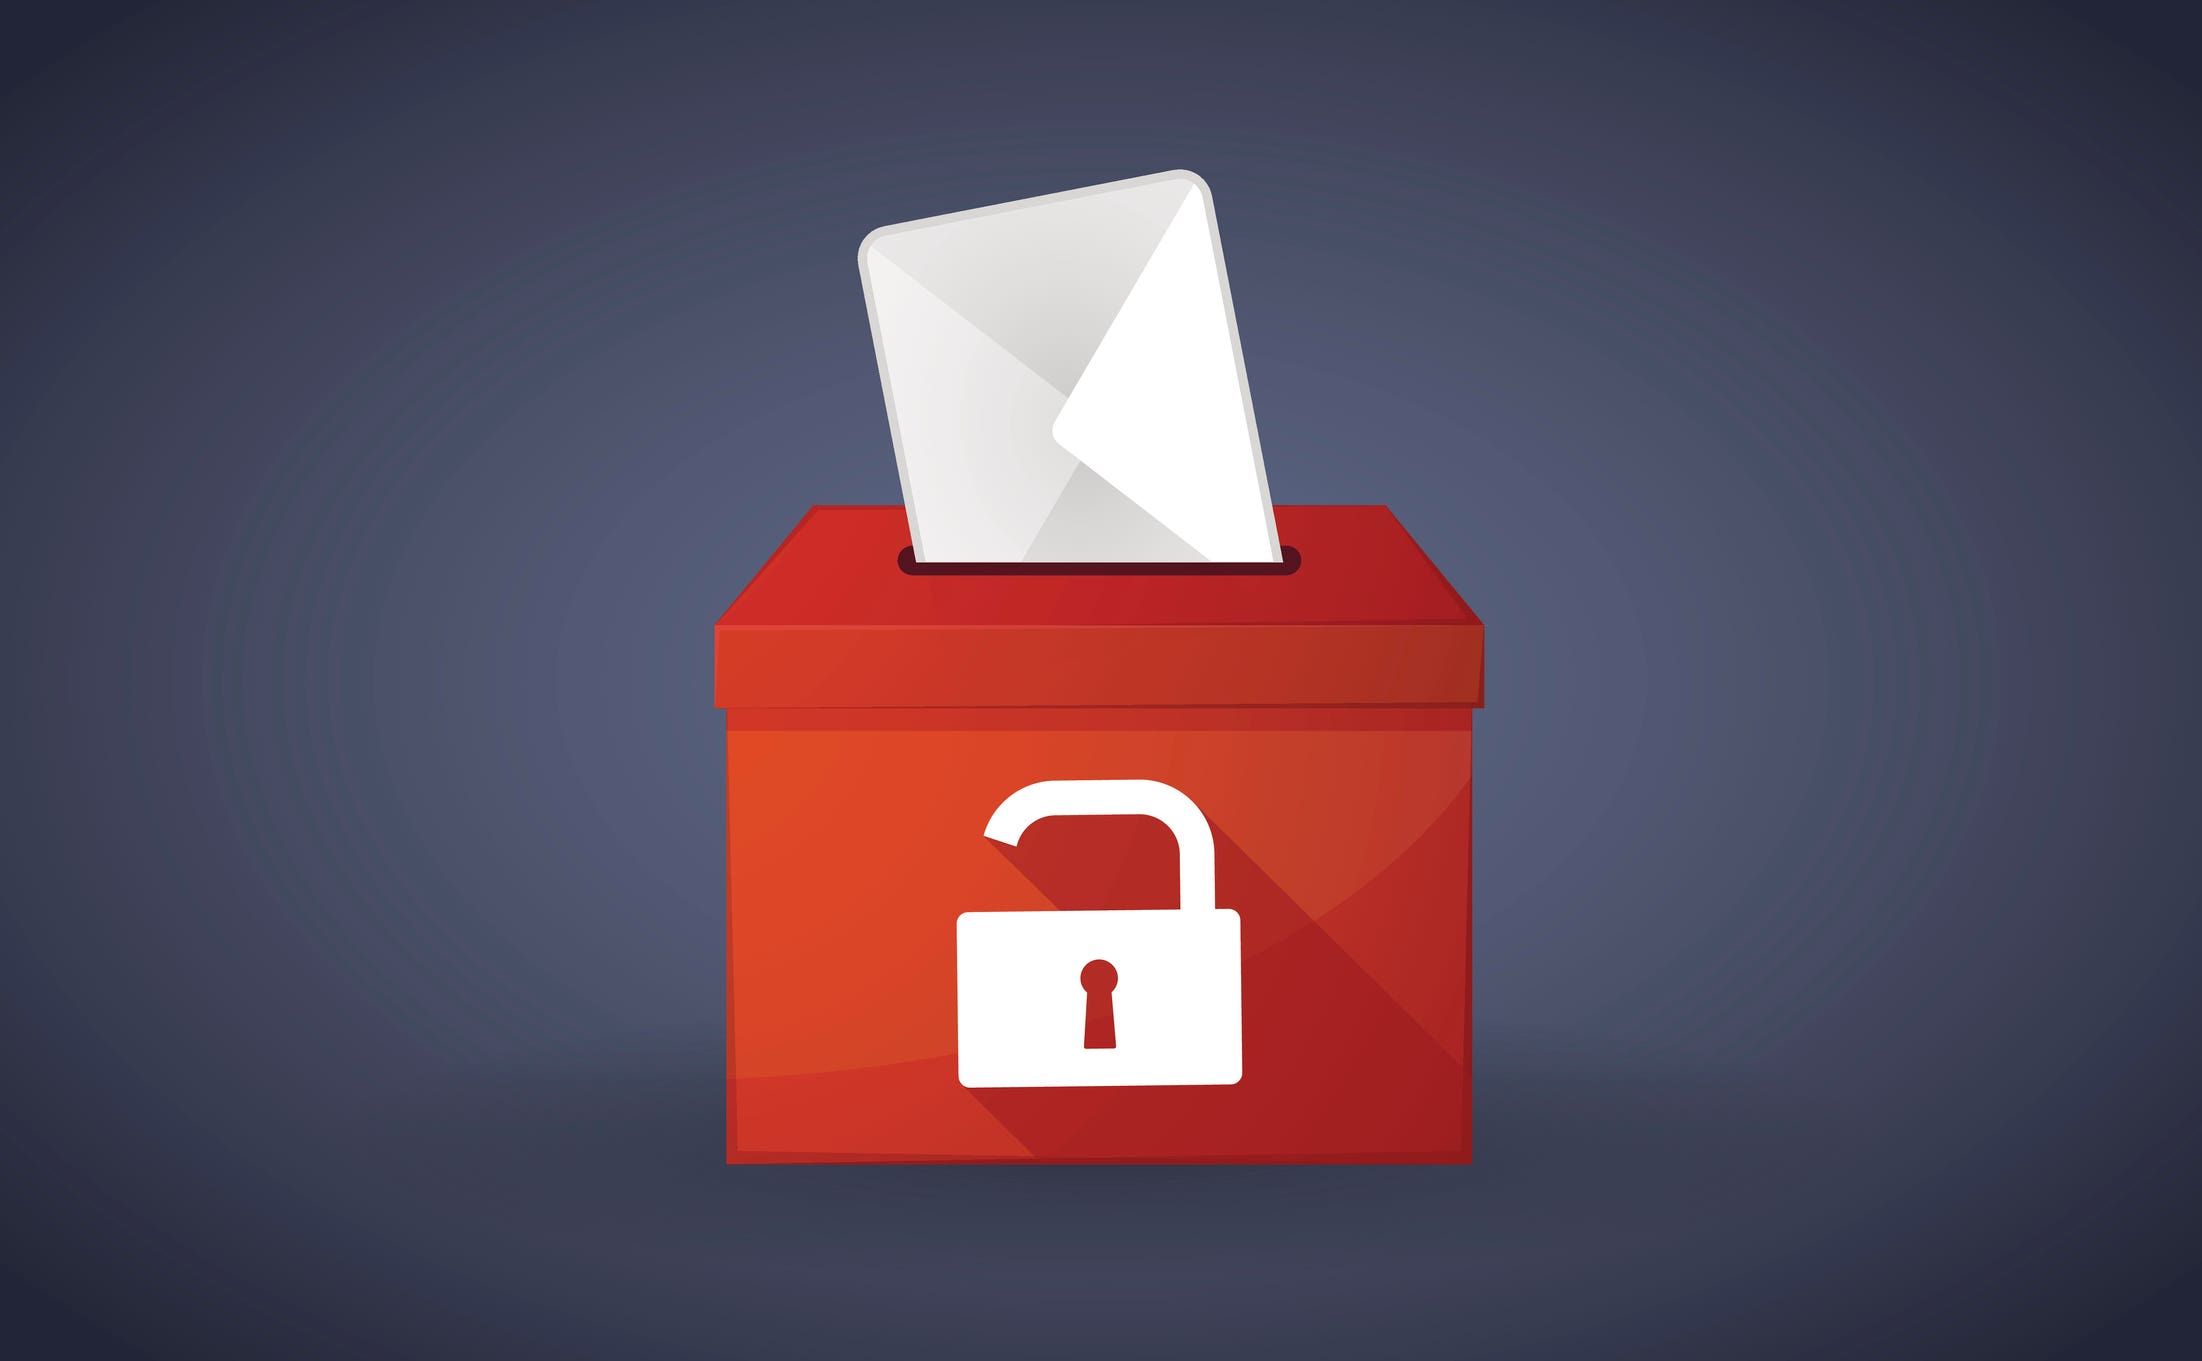 Secure voting